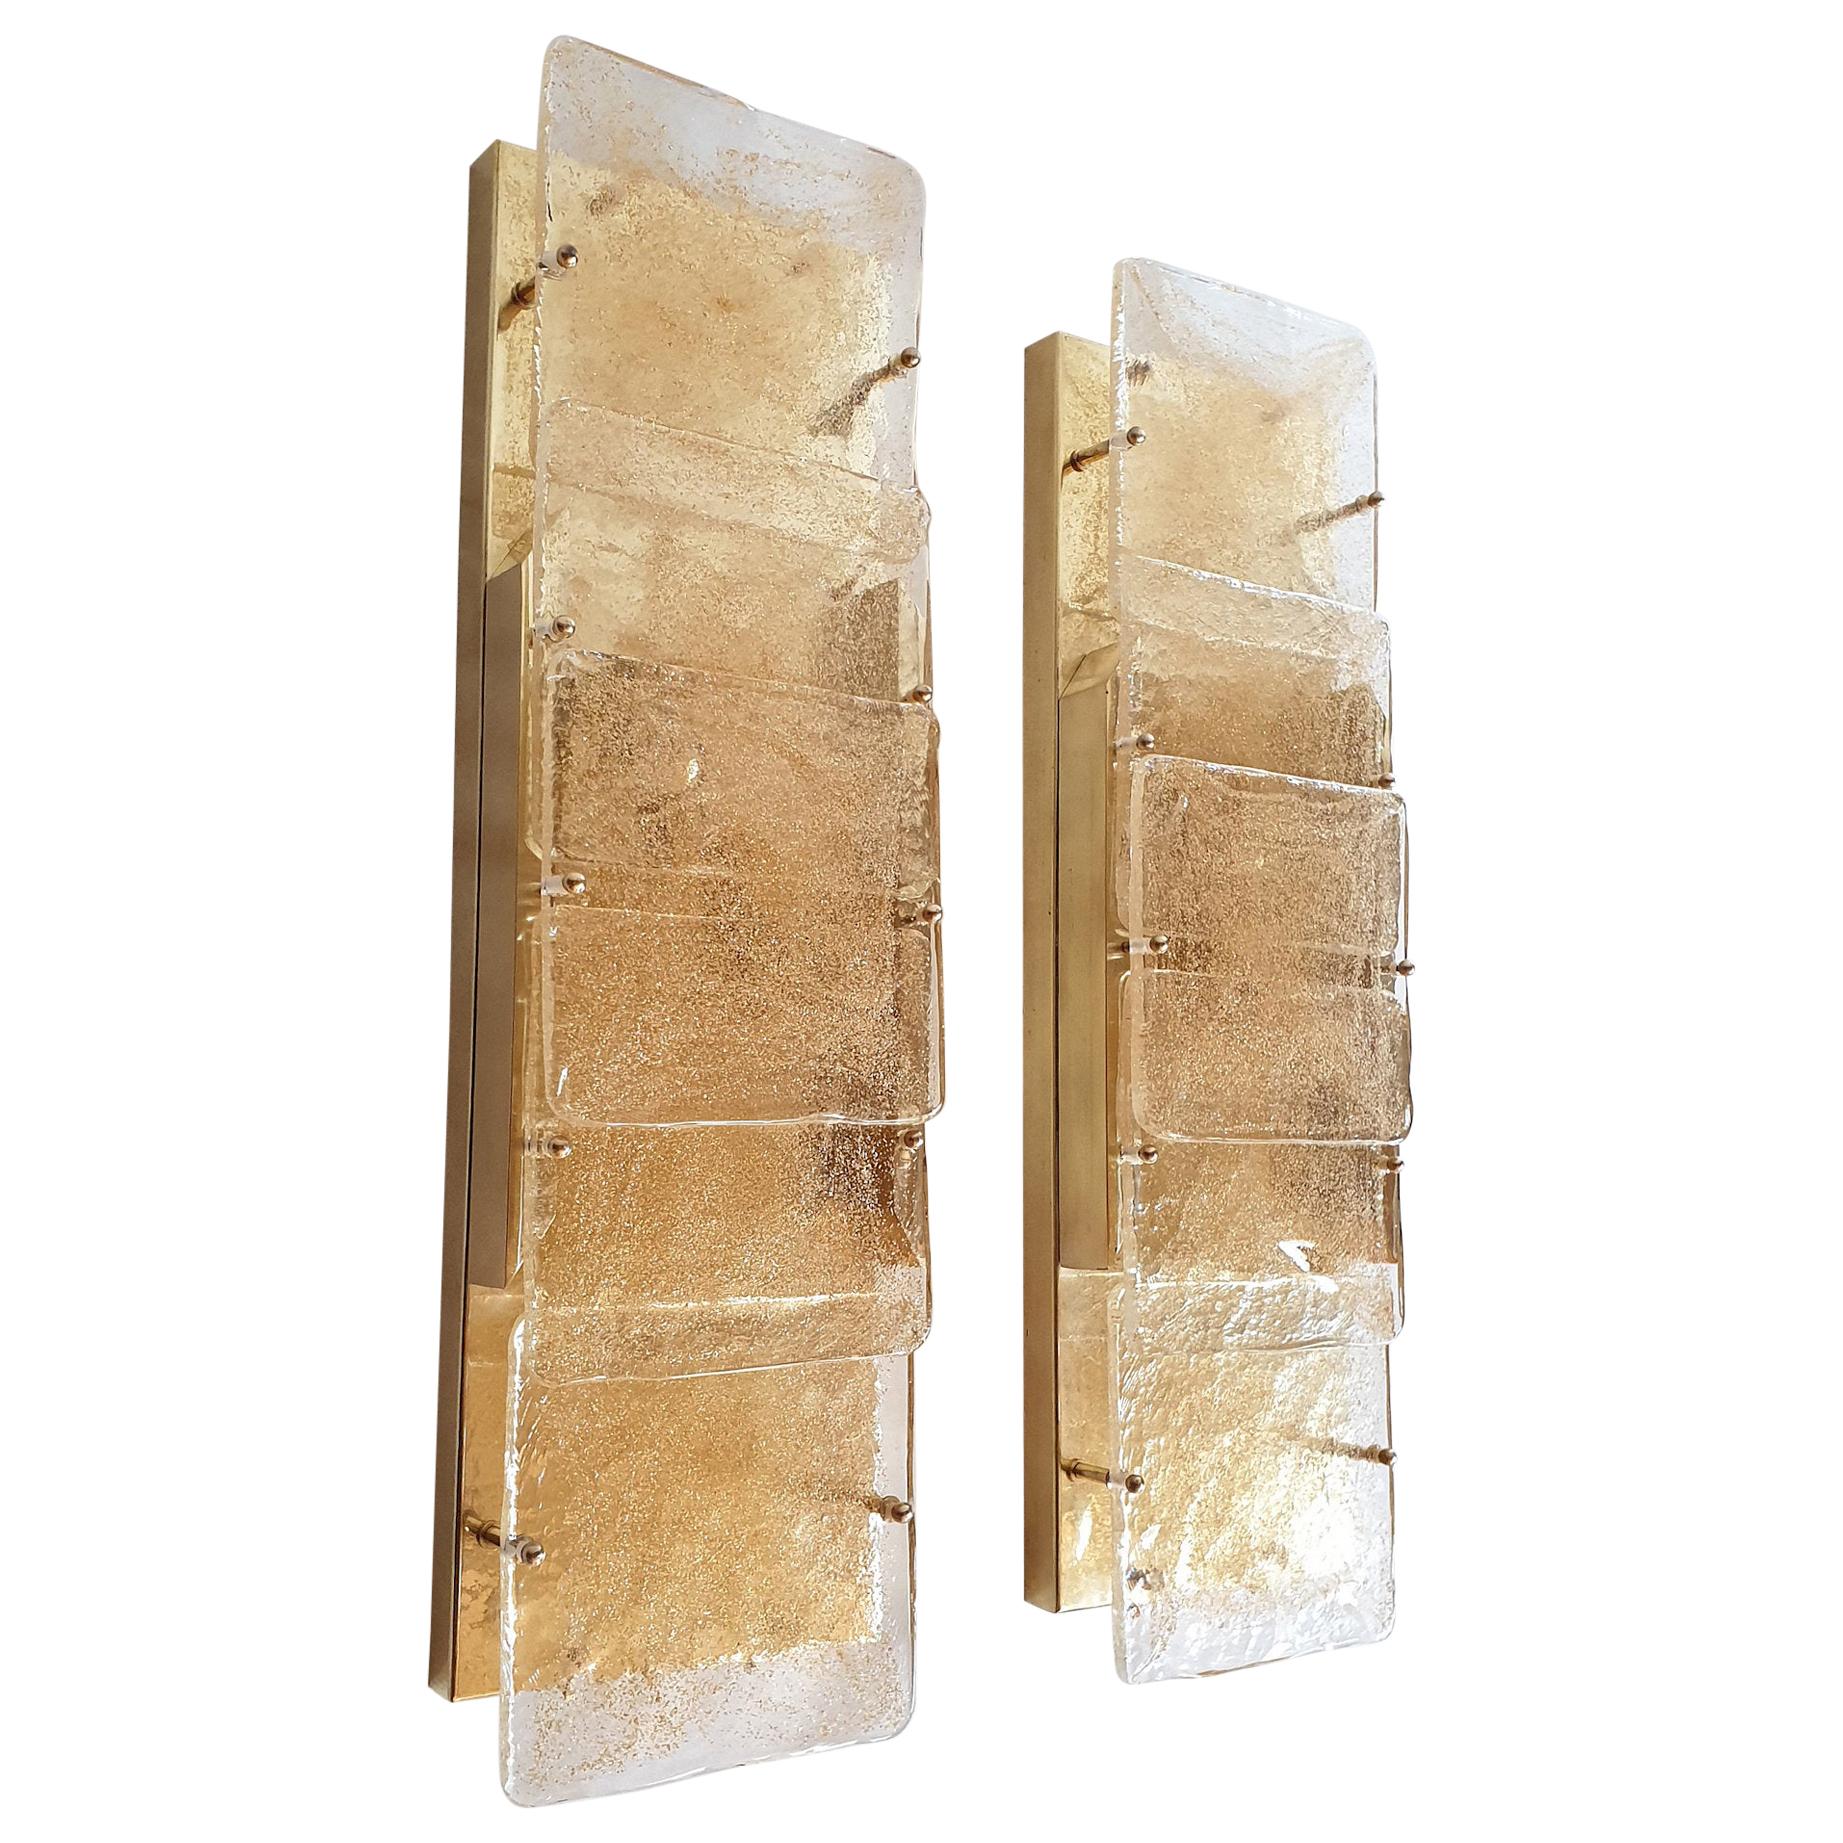 Pair of Mid-Century Modern Murano Glass Wall Sconces Attributed to Mazzega 1970s